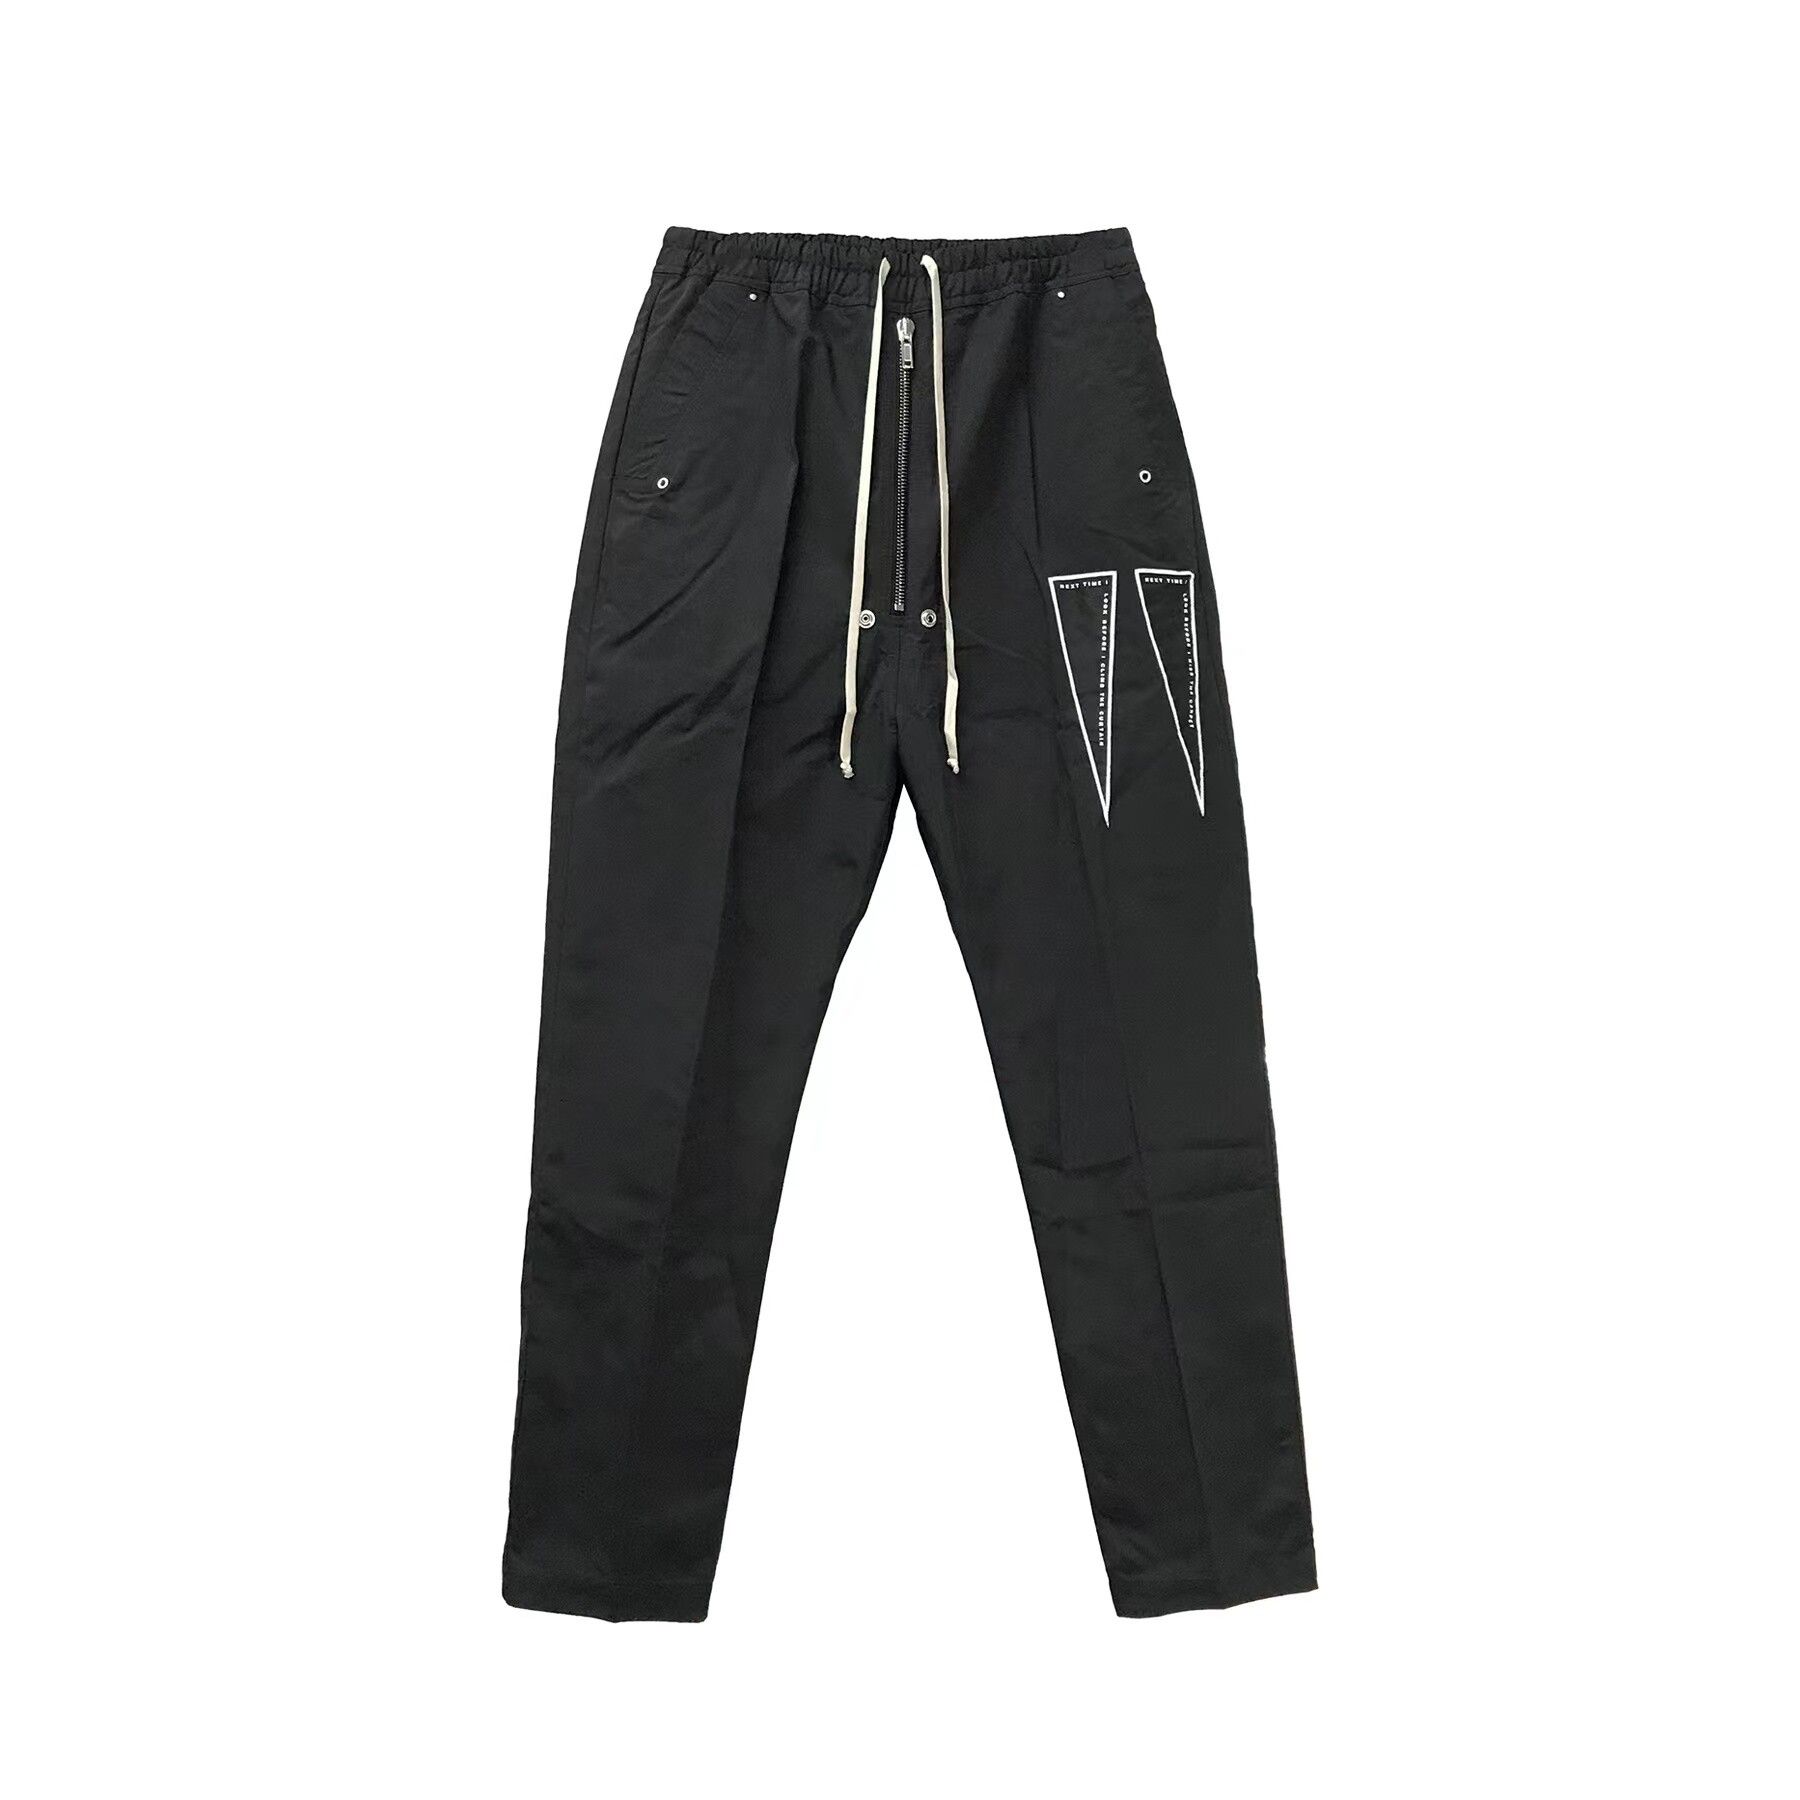 Pants with logo by Rick Owens Drkshdw